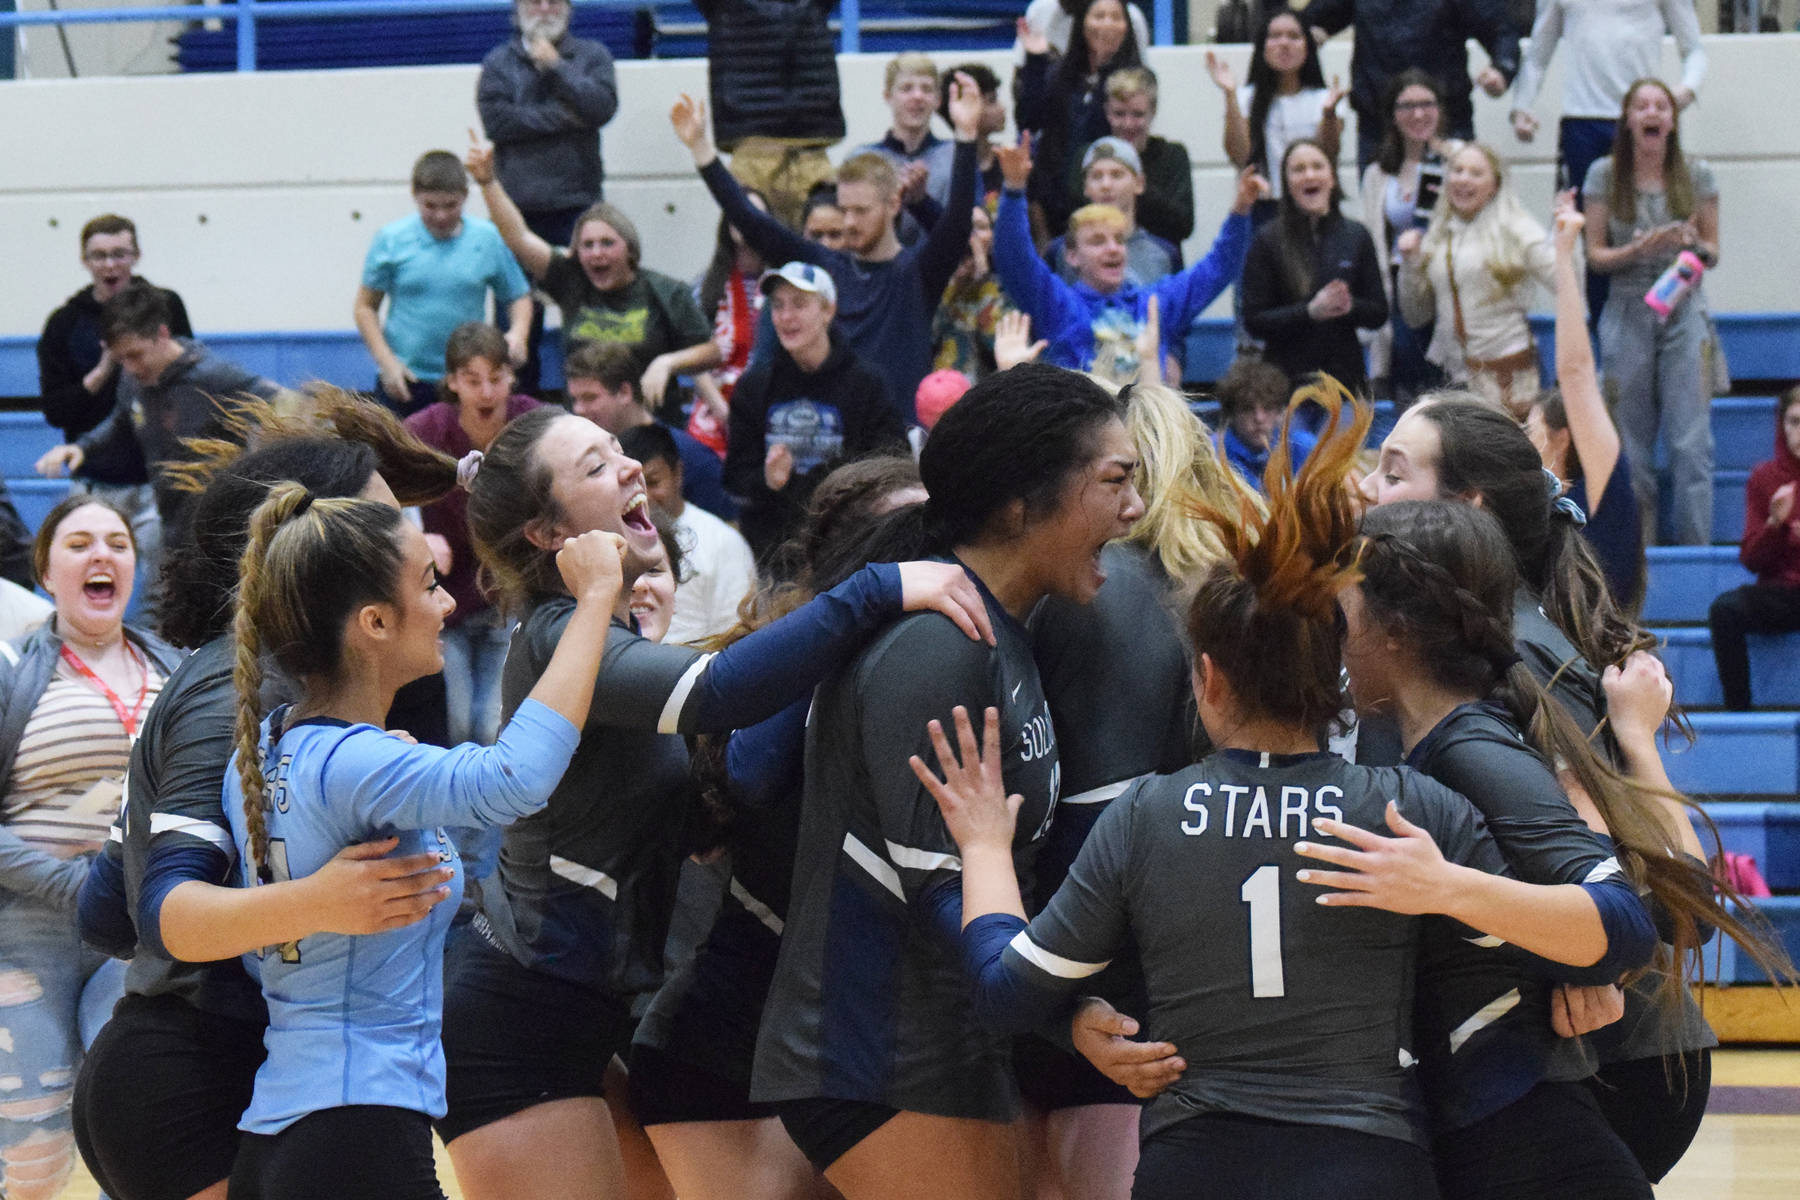 The Soldotna volleyball team celebrates on the floor after beating Wasilla Thursday, Nov. 7, 2019, at the Northern Lights Conference tournament at Soldotna High School in Soldotna, Alaska. (Photo by Joey Klecka/Peninsula Clarion)